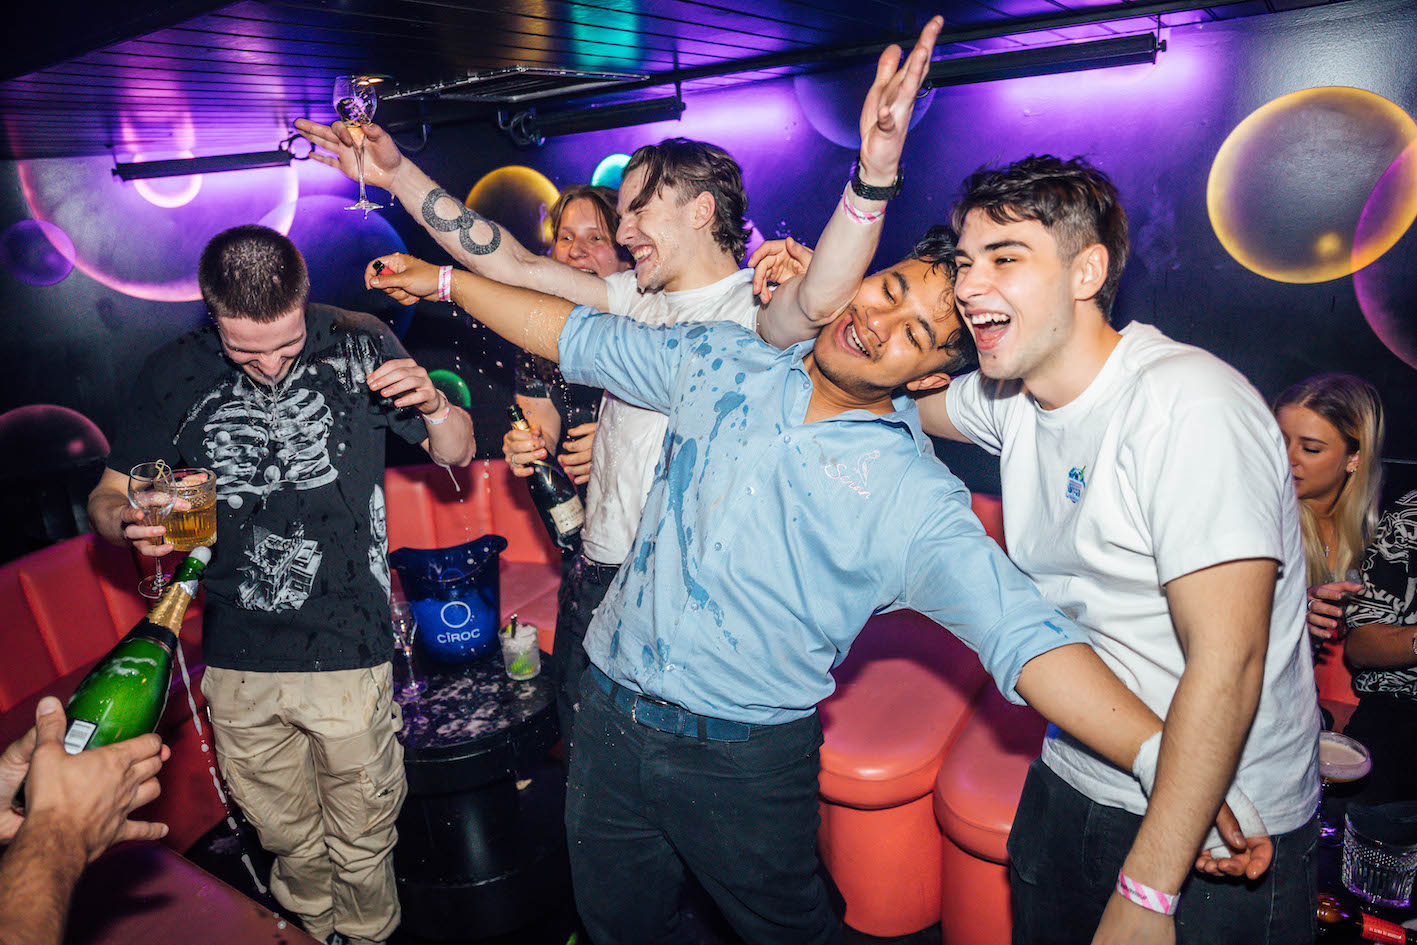 a group of men dancing in a VIP booth, having a bottle of champagne sprayed over them